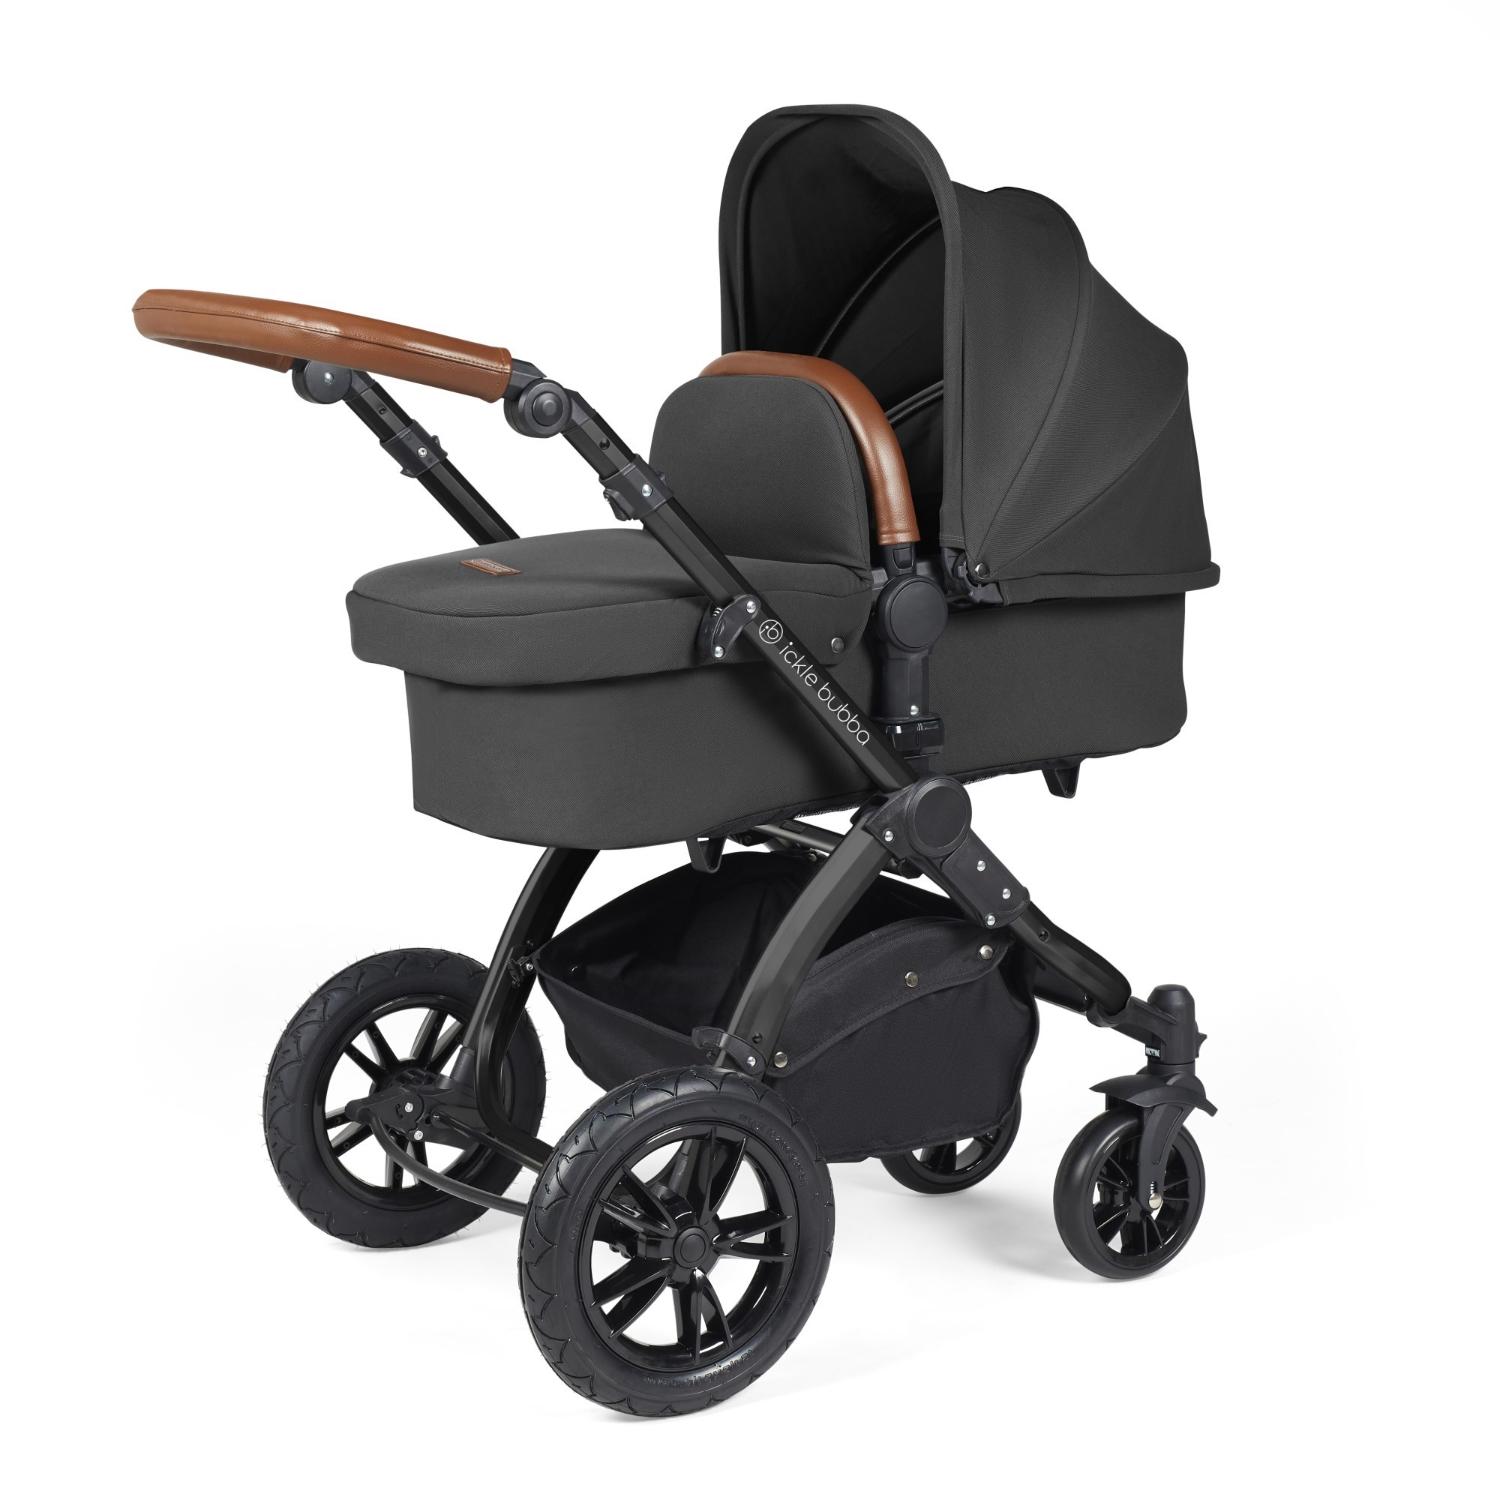 Ickle Bubba Stomp Luxe Pushchair with carrycot attached in Charcoal Grey colour with tan handle